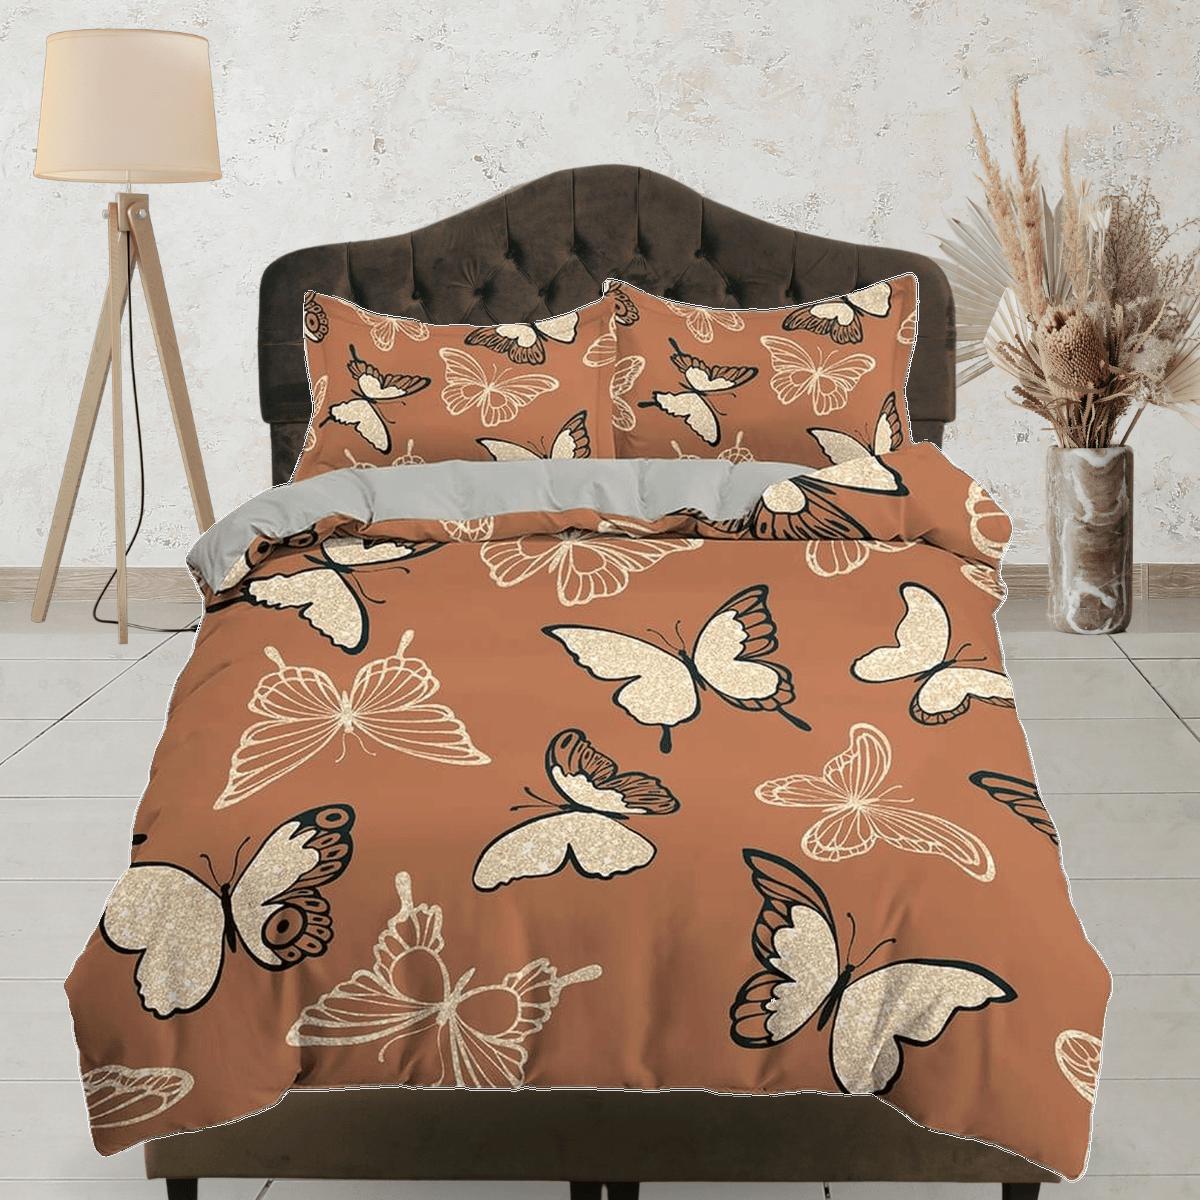 daintyduvet Retro butterfly bedding brown duvet cover colorful dorm bedding, full size adult duvet king queen twin, butterfly nursery toddler bedding